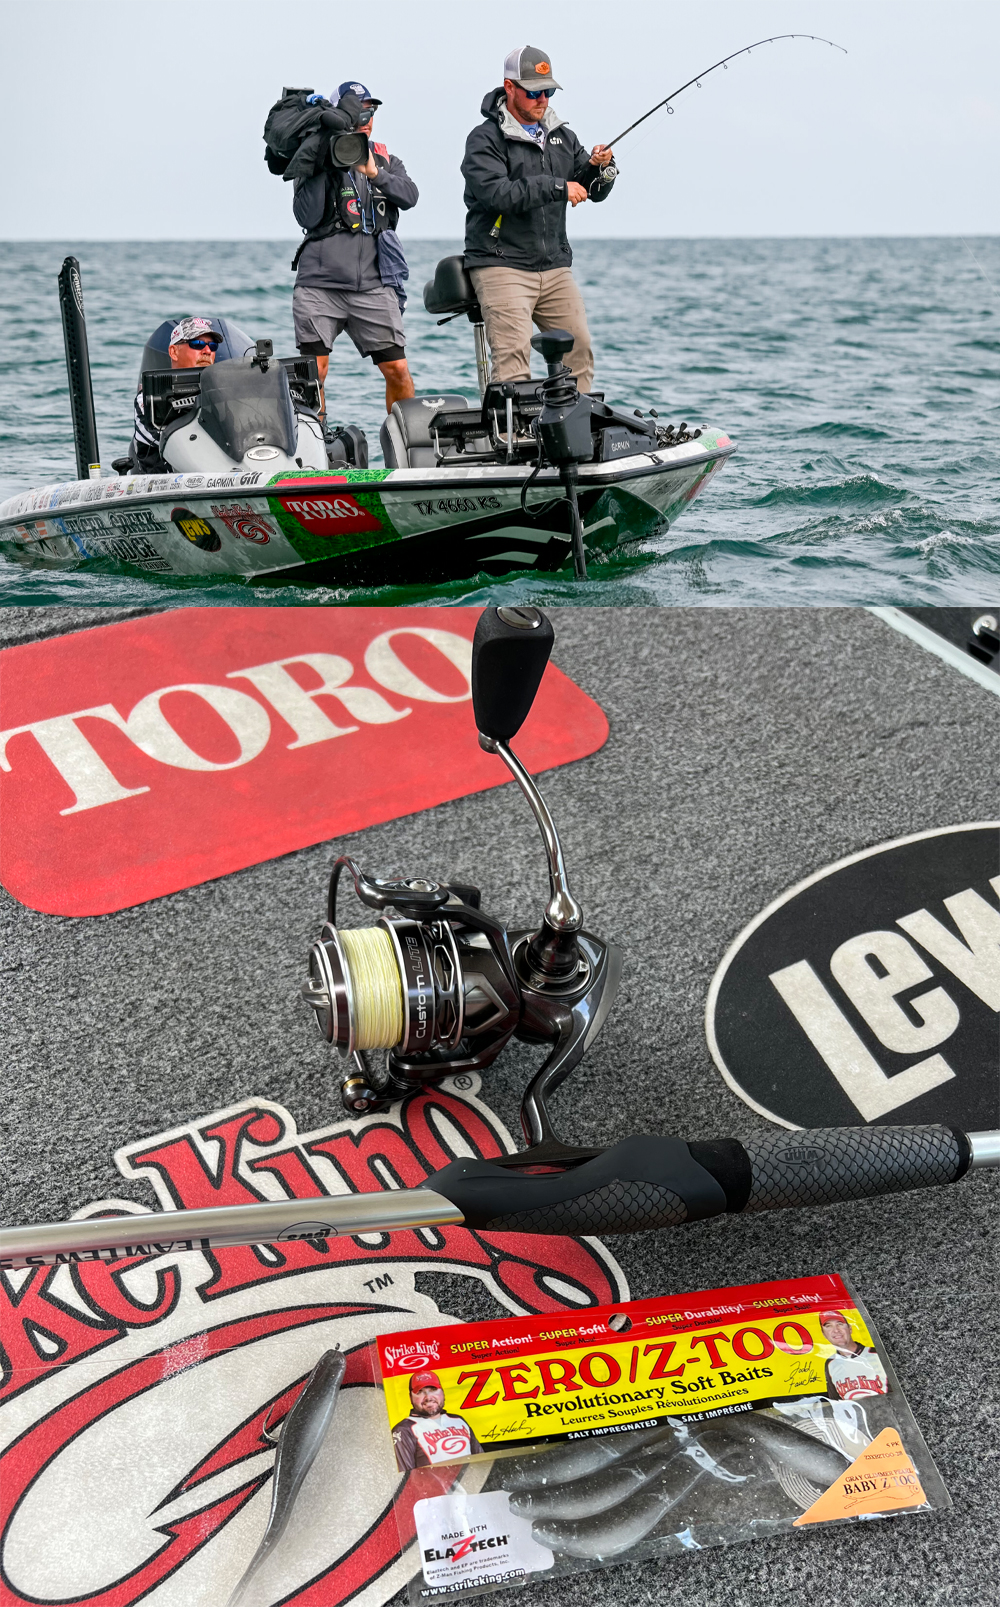 St. Croix's Rods for Every Budget with Jesse Wiggins